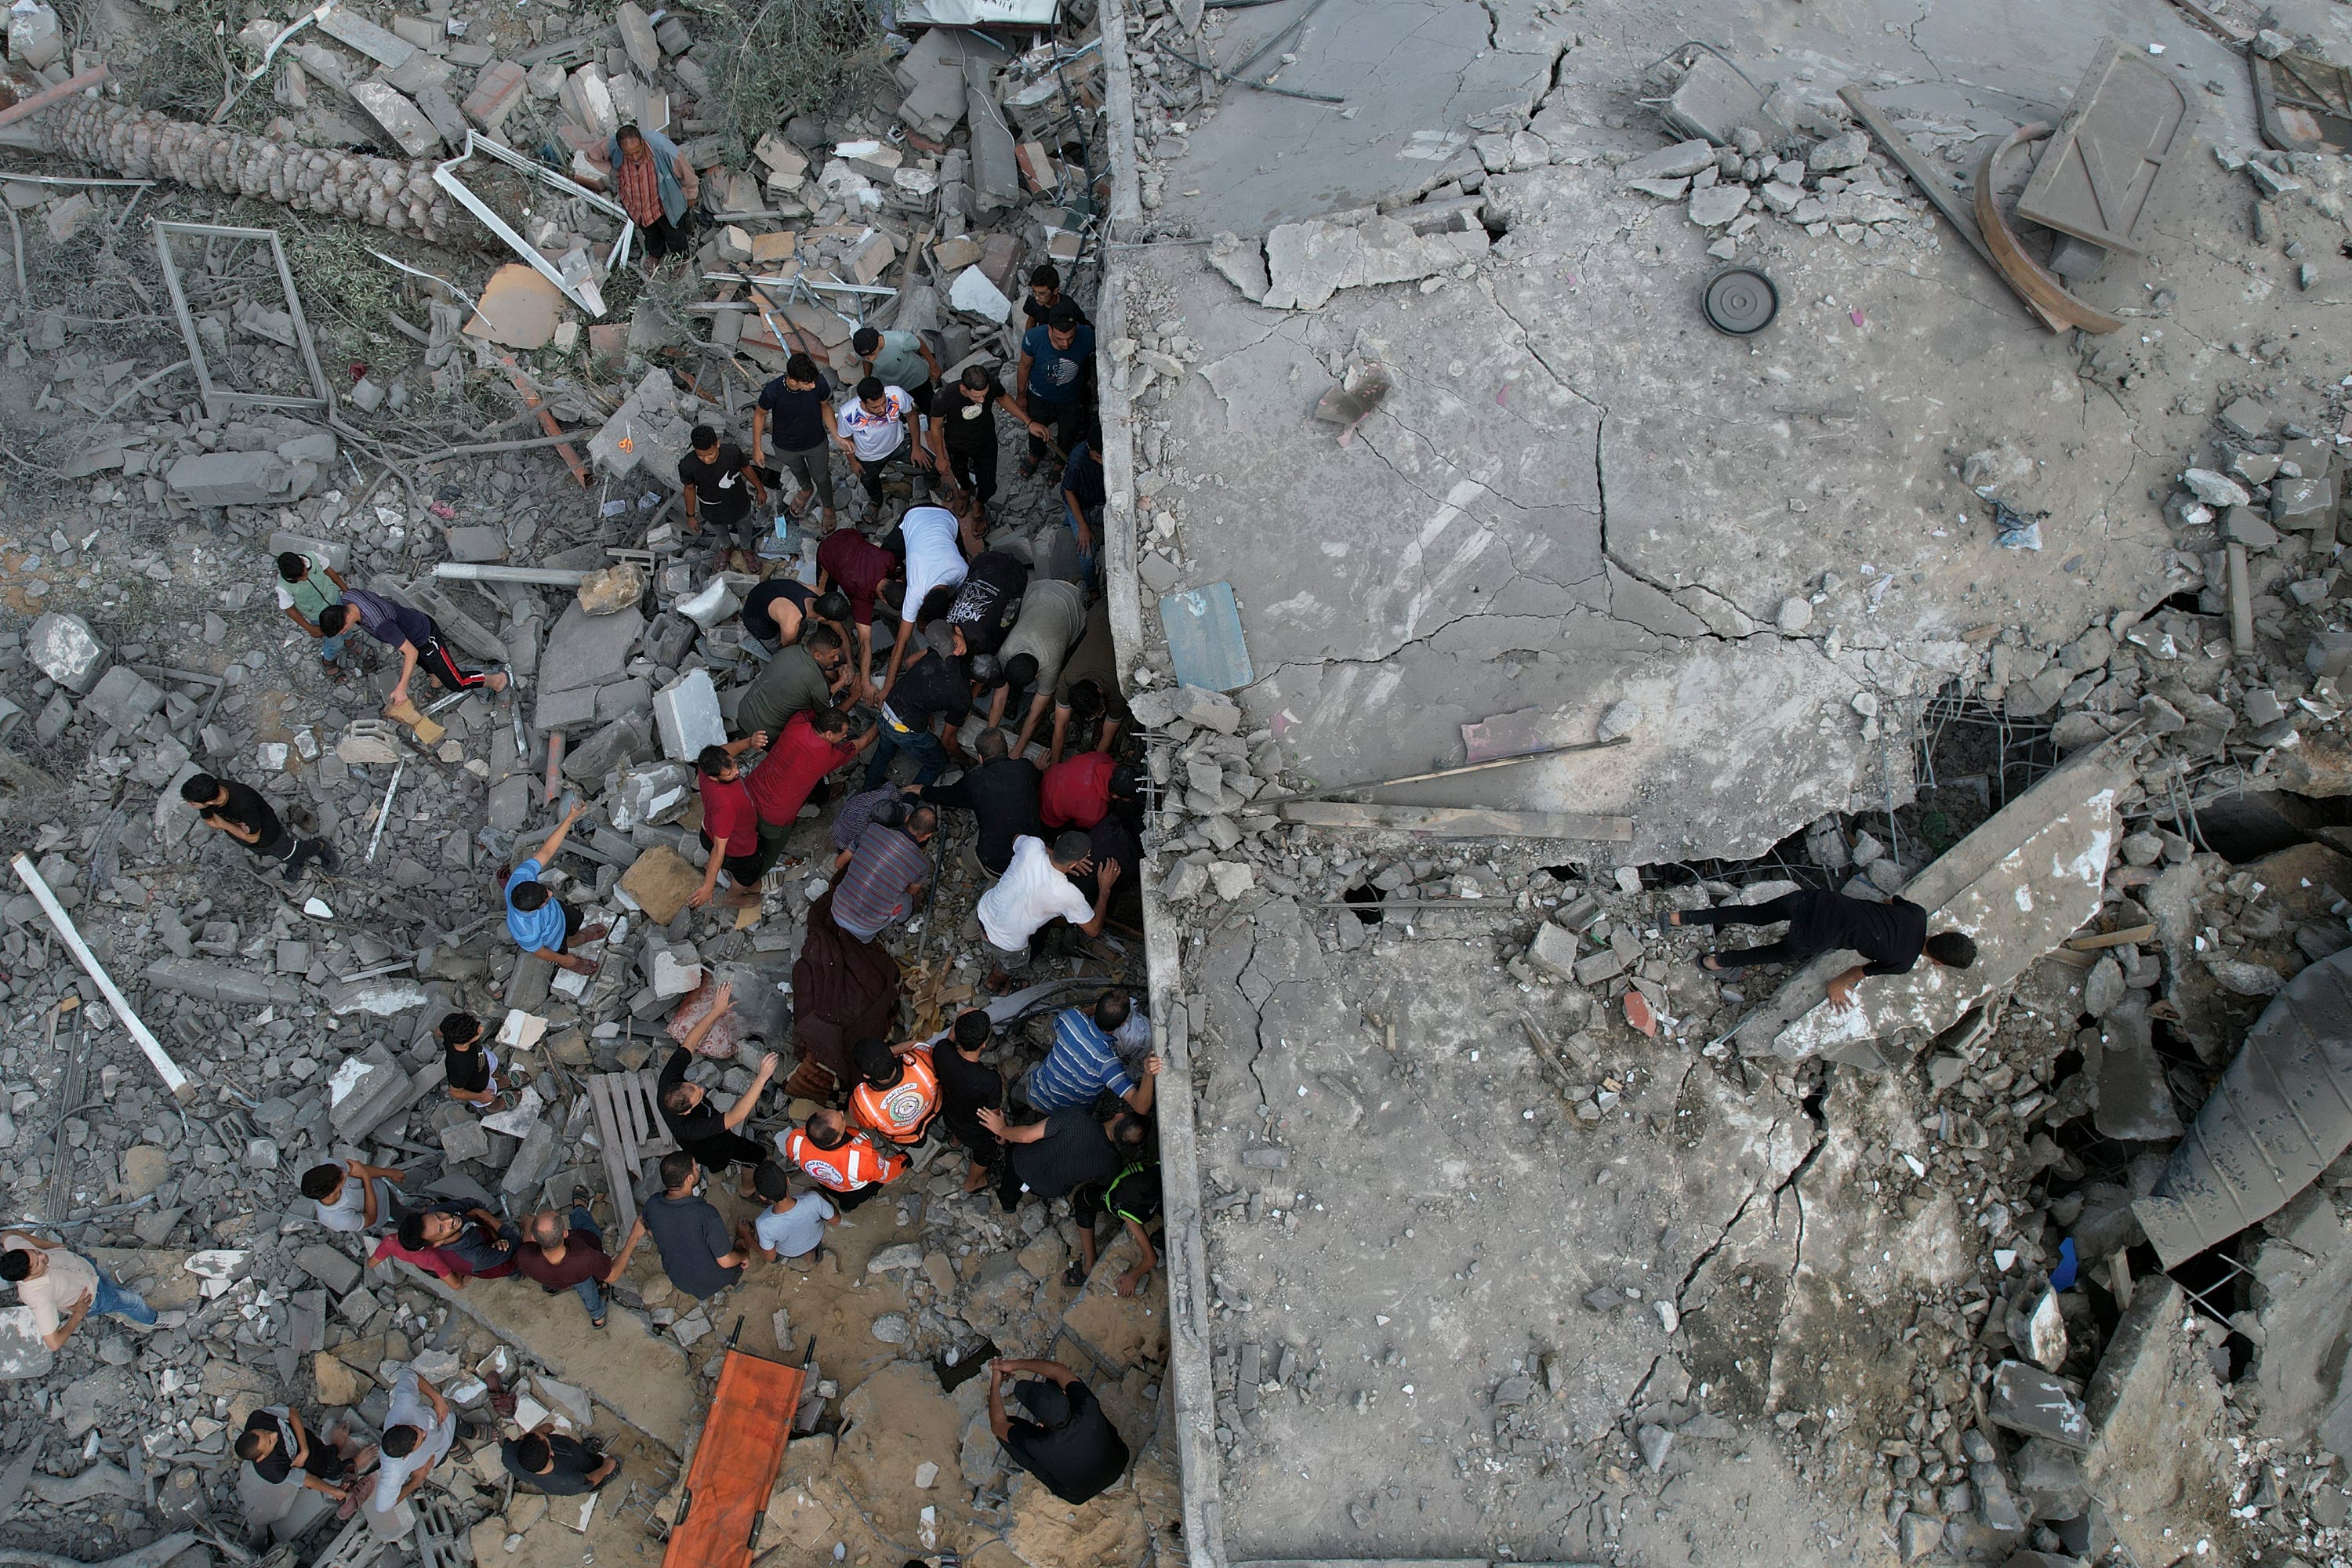 Palestinians look for survivors after an attack in Gaza.